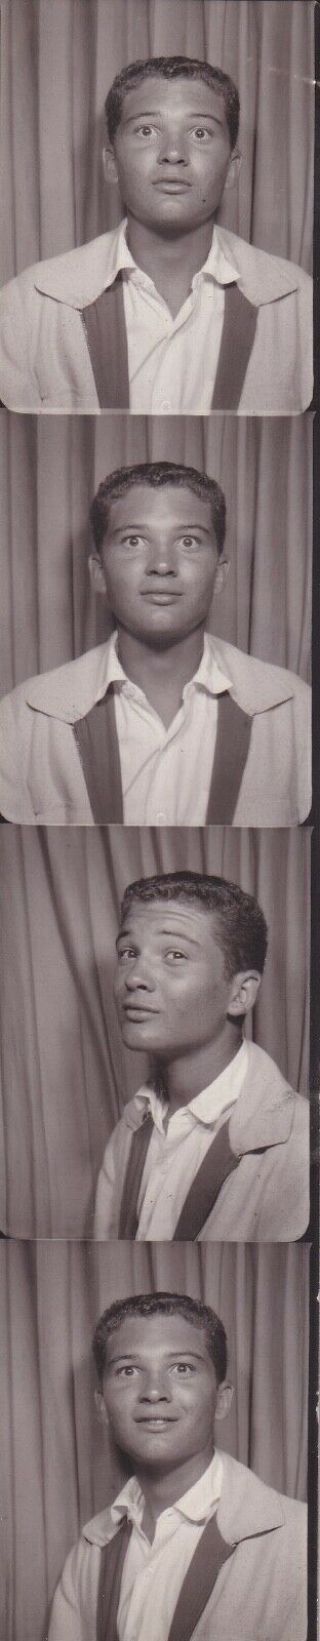 Vintage Photo Booth - Strip - Handsome Young Man,  Wide Eyes,  Side Eye - Gay Interest